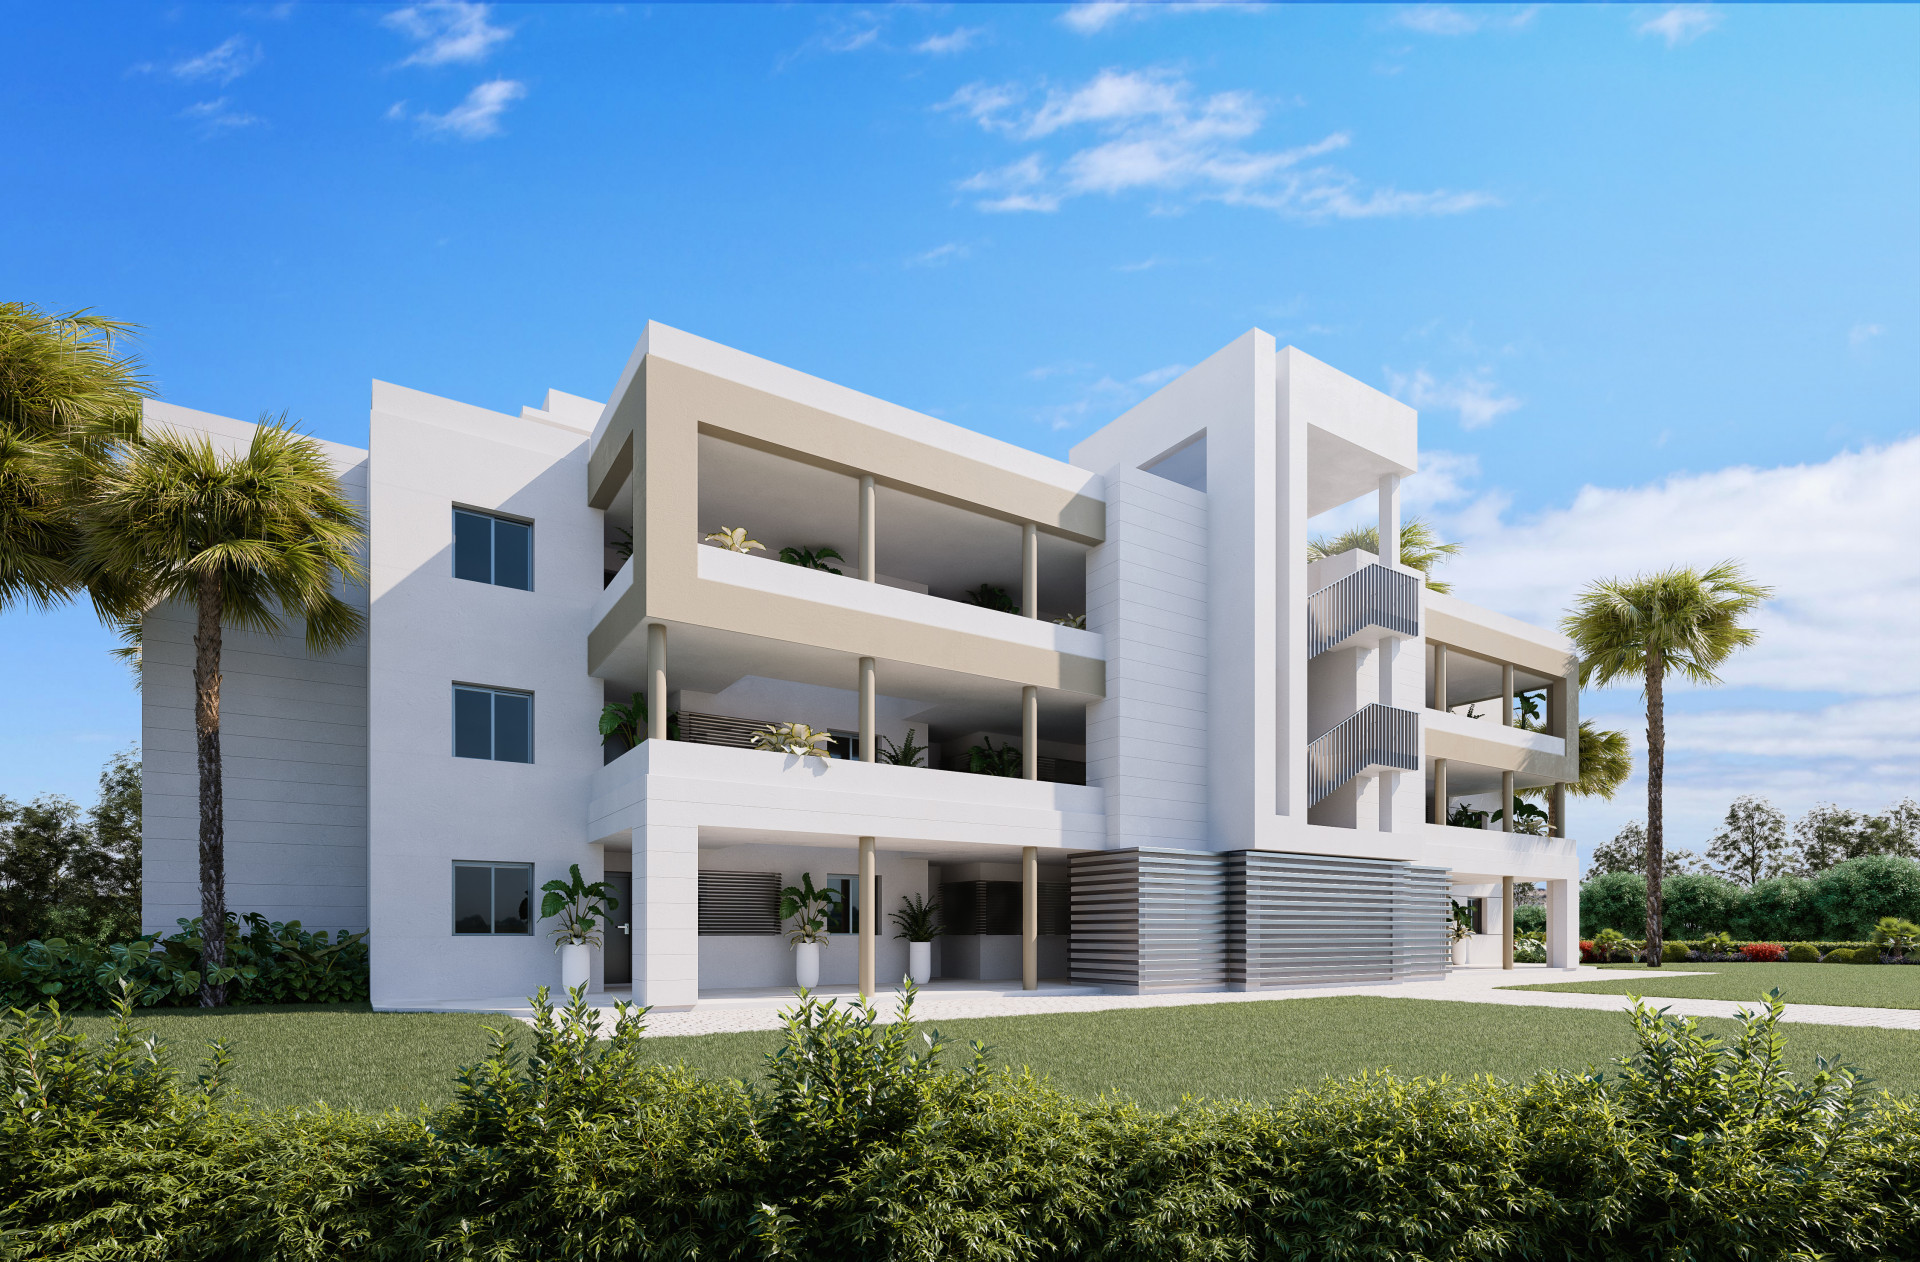 Dream Golf Calanova: Luxury residential project located on the first line of the Calanova golf course in the municipality of Mijas, Malaga.